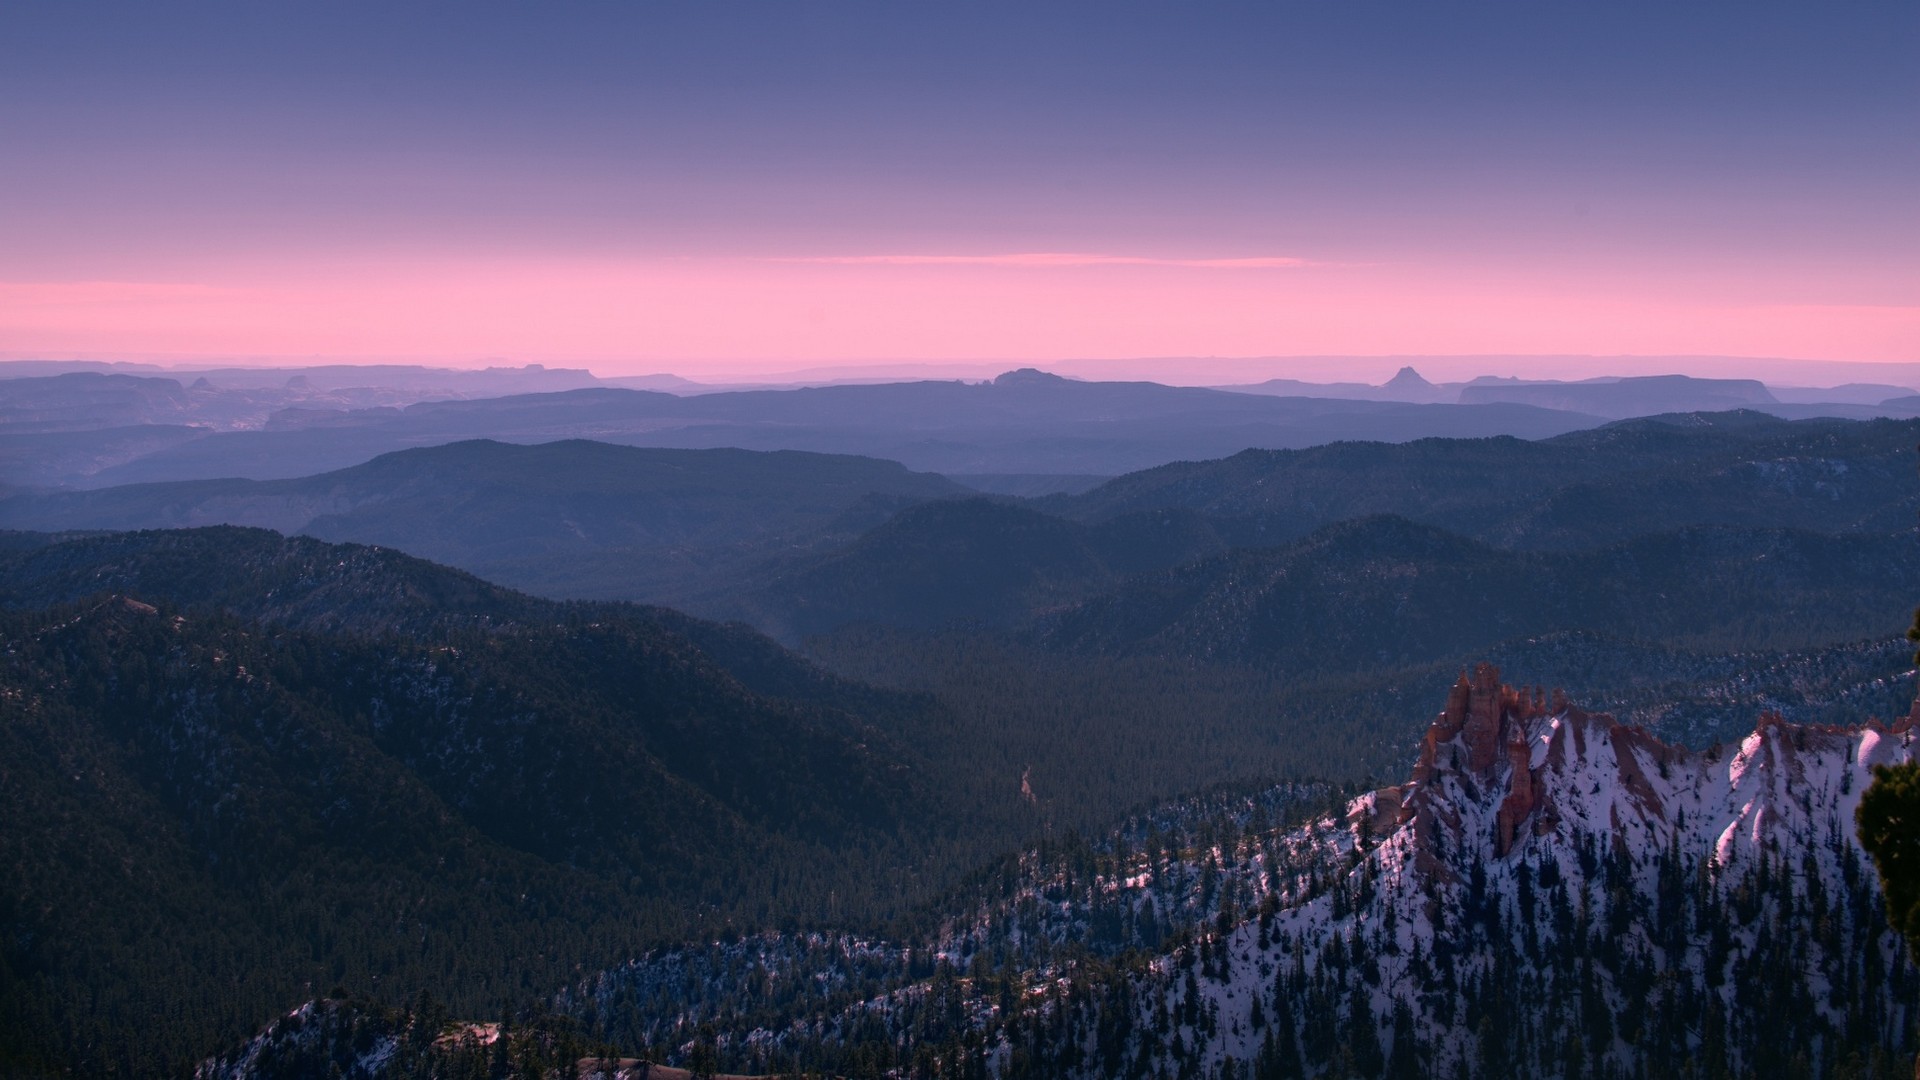 General 1920x1080 nature landscape Bryce Canyon National Park mist sunset mountains hills forest snow Utah USA